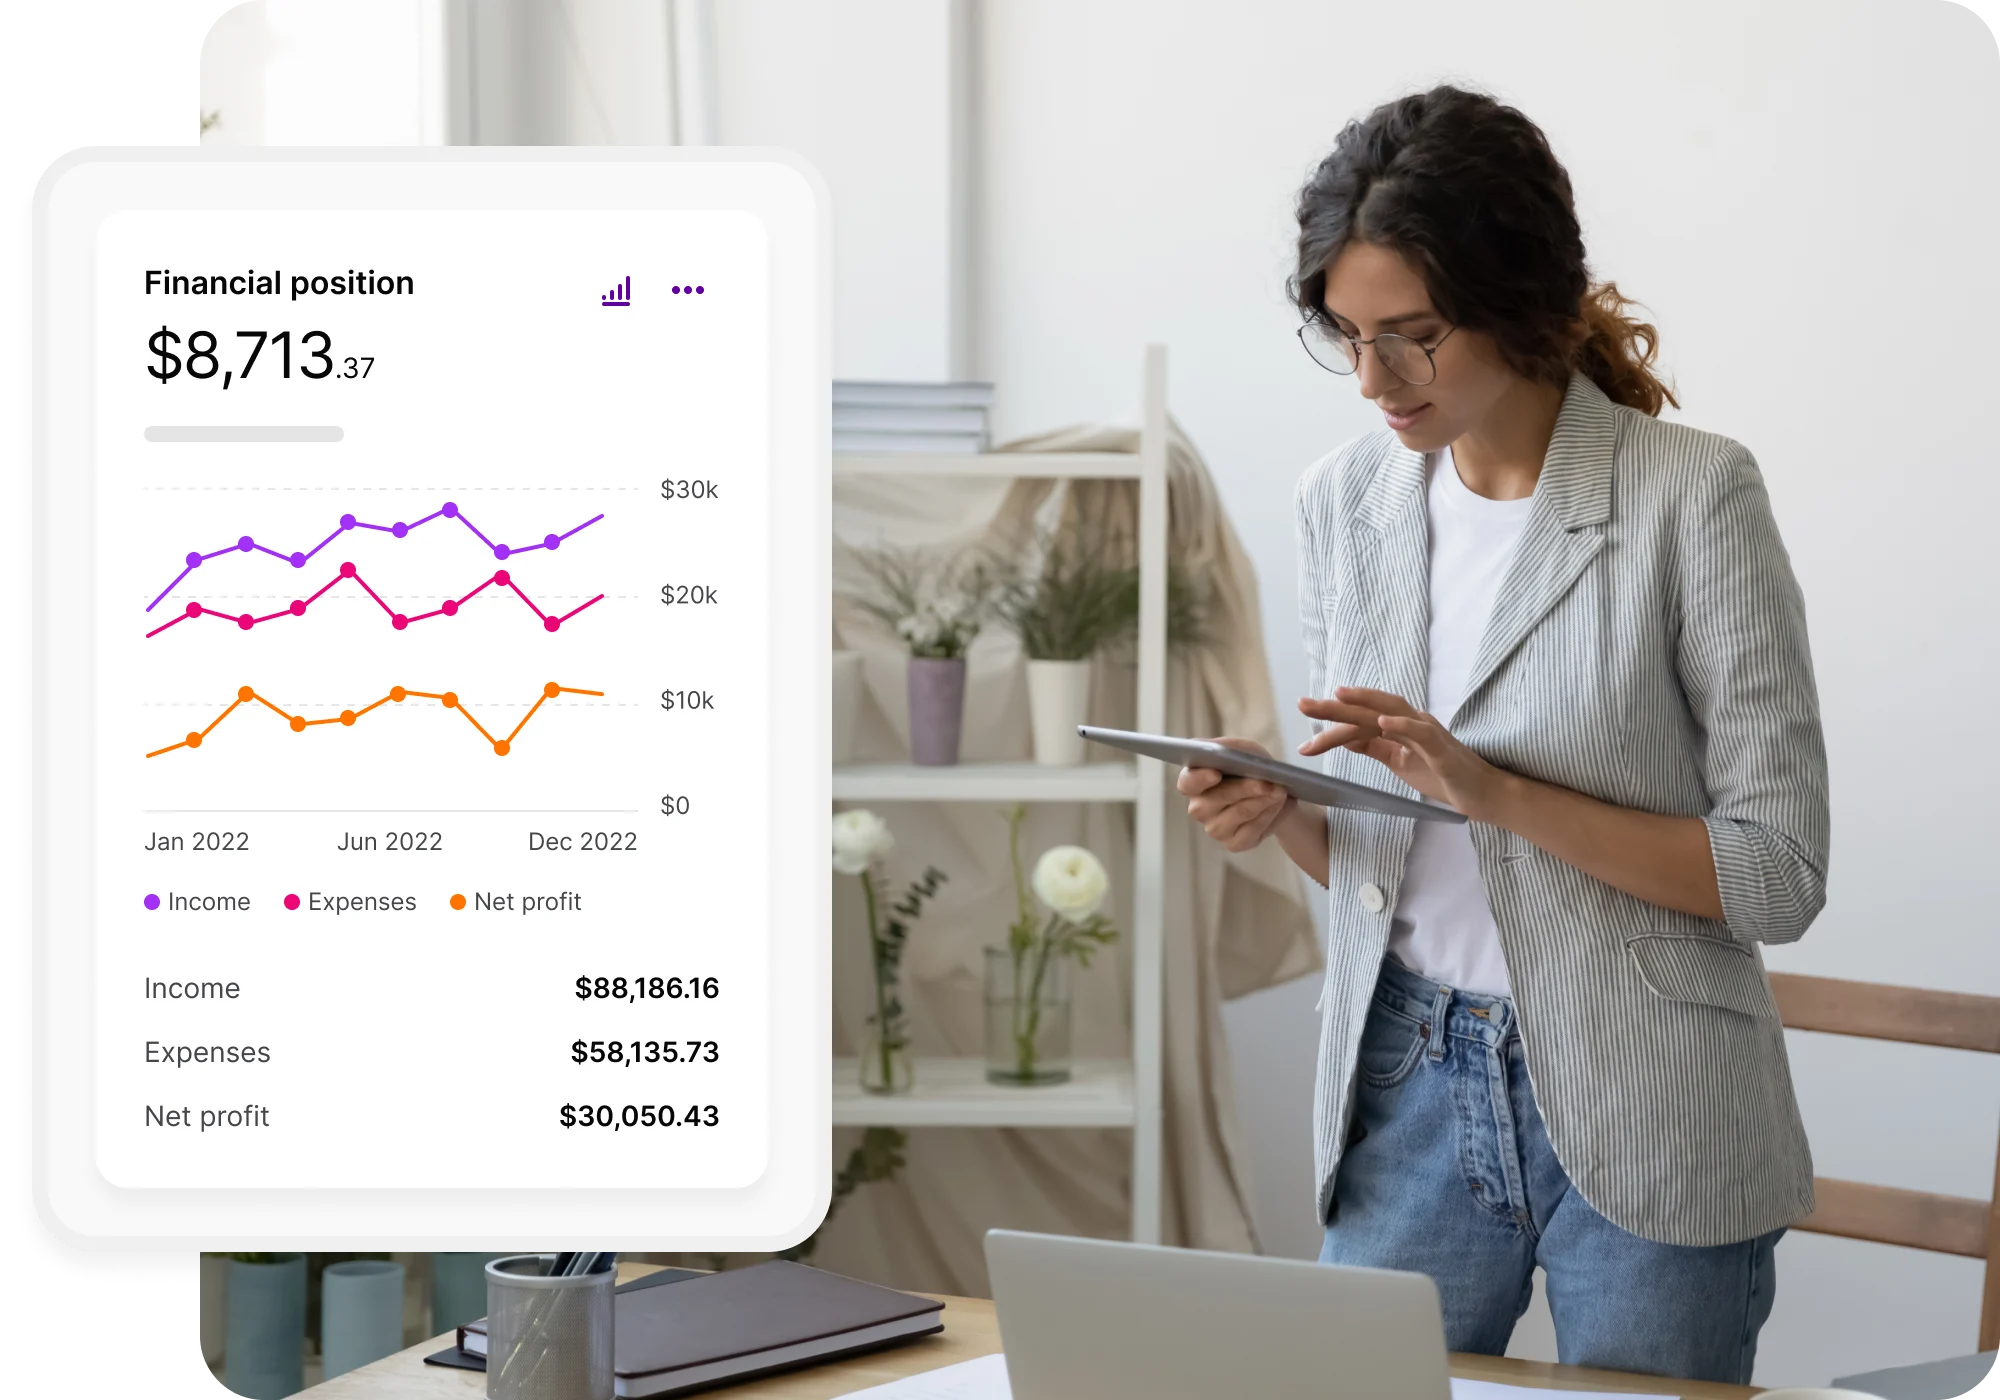 On the lefthand side of the image is a view of the financial reporting available from your MYOB Business dashboard. In this snapshot report, you can see income, expenses and net profit by month. On the righthand side of the image is a woman intently looking at an ipad. 